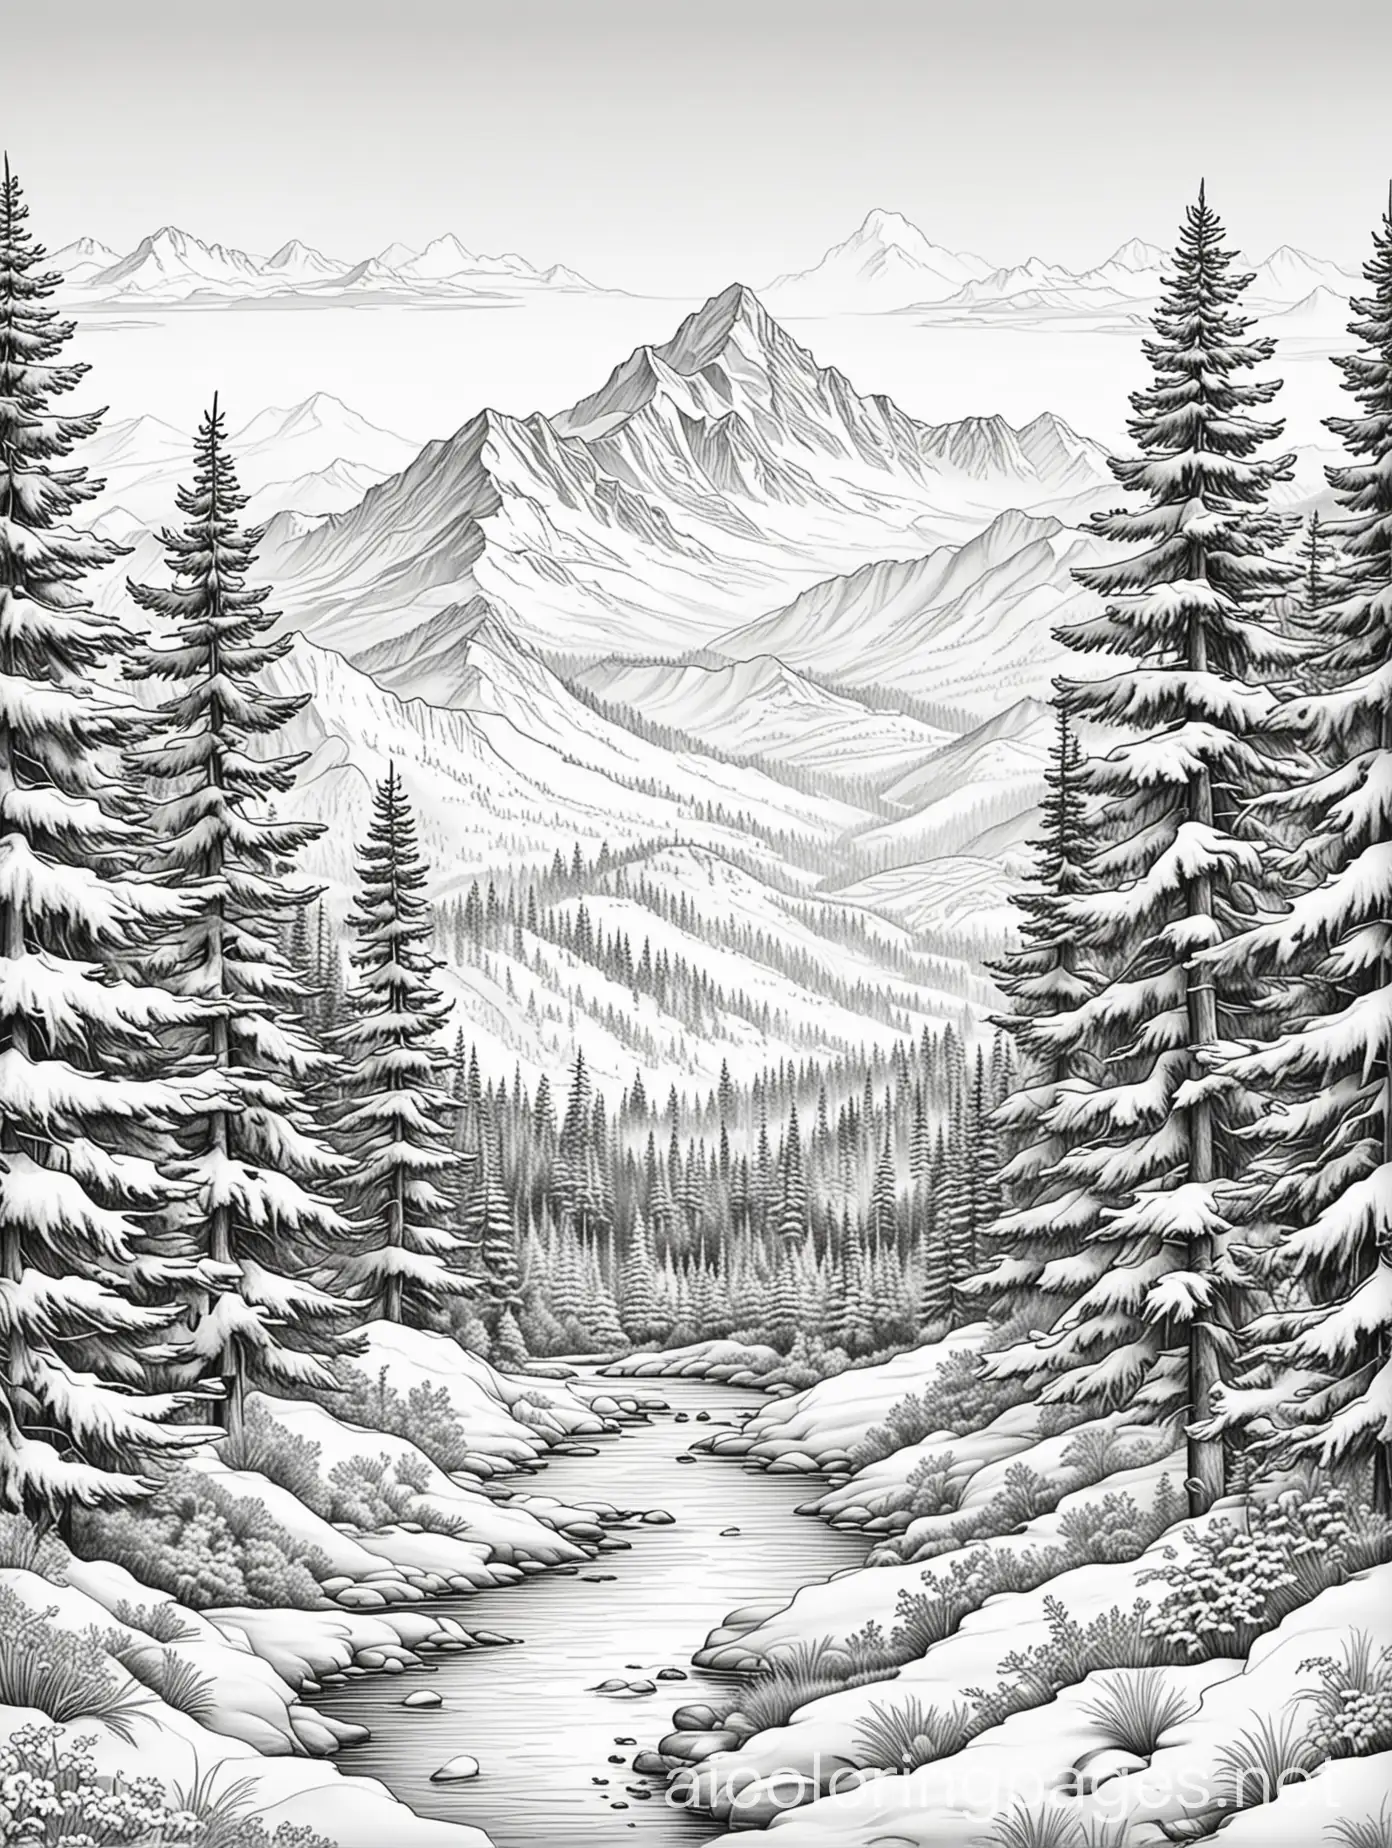 Serene mountain landscape with snow-capped peaks and evergreen trees, Coloring Page, black and white, line art, white background, Simplicity, Ample White Space. The background of the coloring page is plain white to make it easy for young children to color within the lines. The outlines of all the subjects are easy to distinguish, making it simple for kids to color without too much difficulty